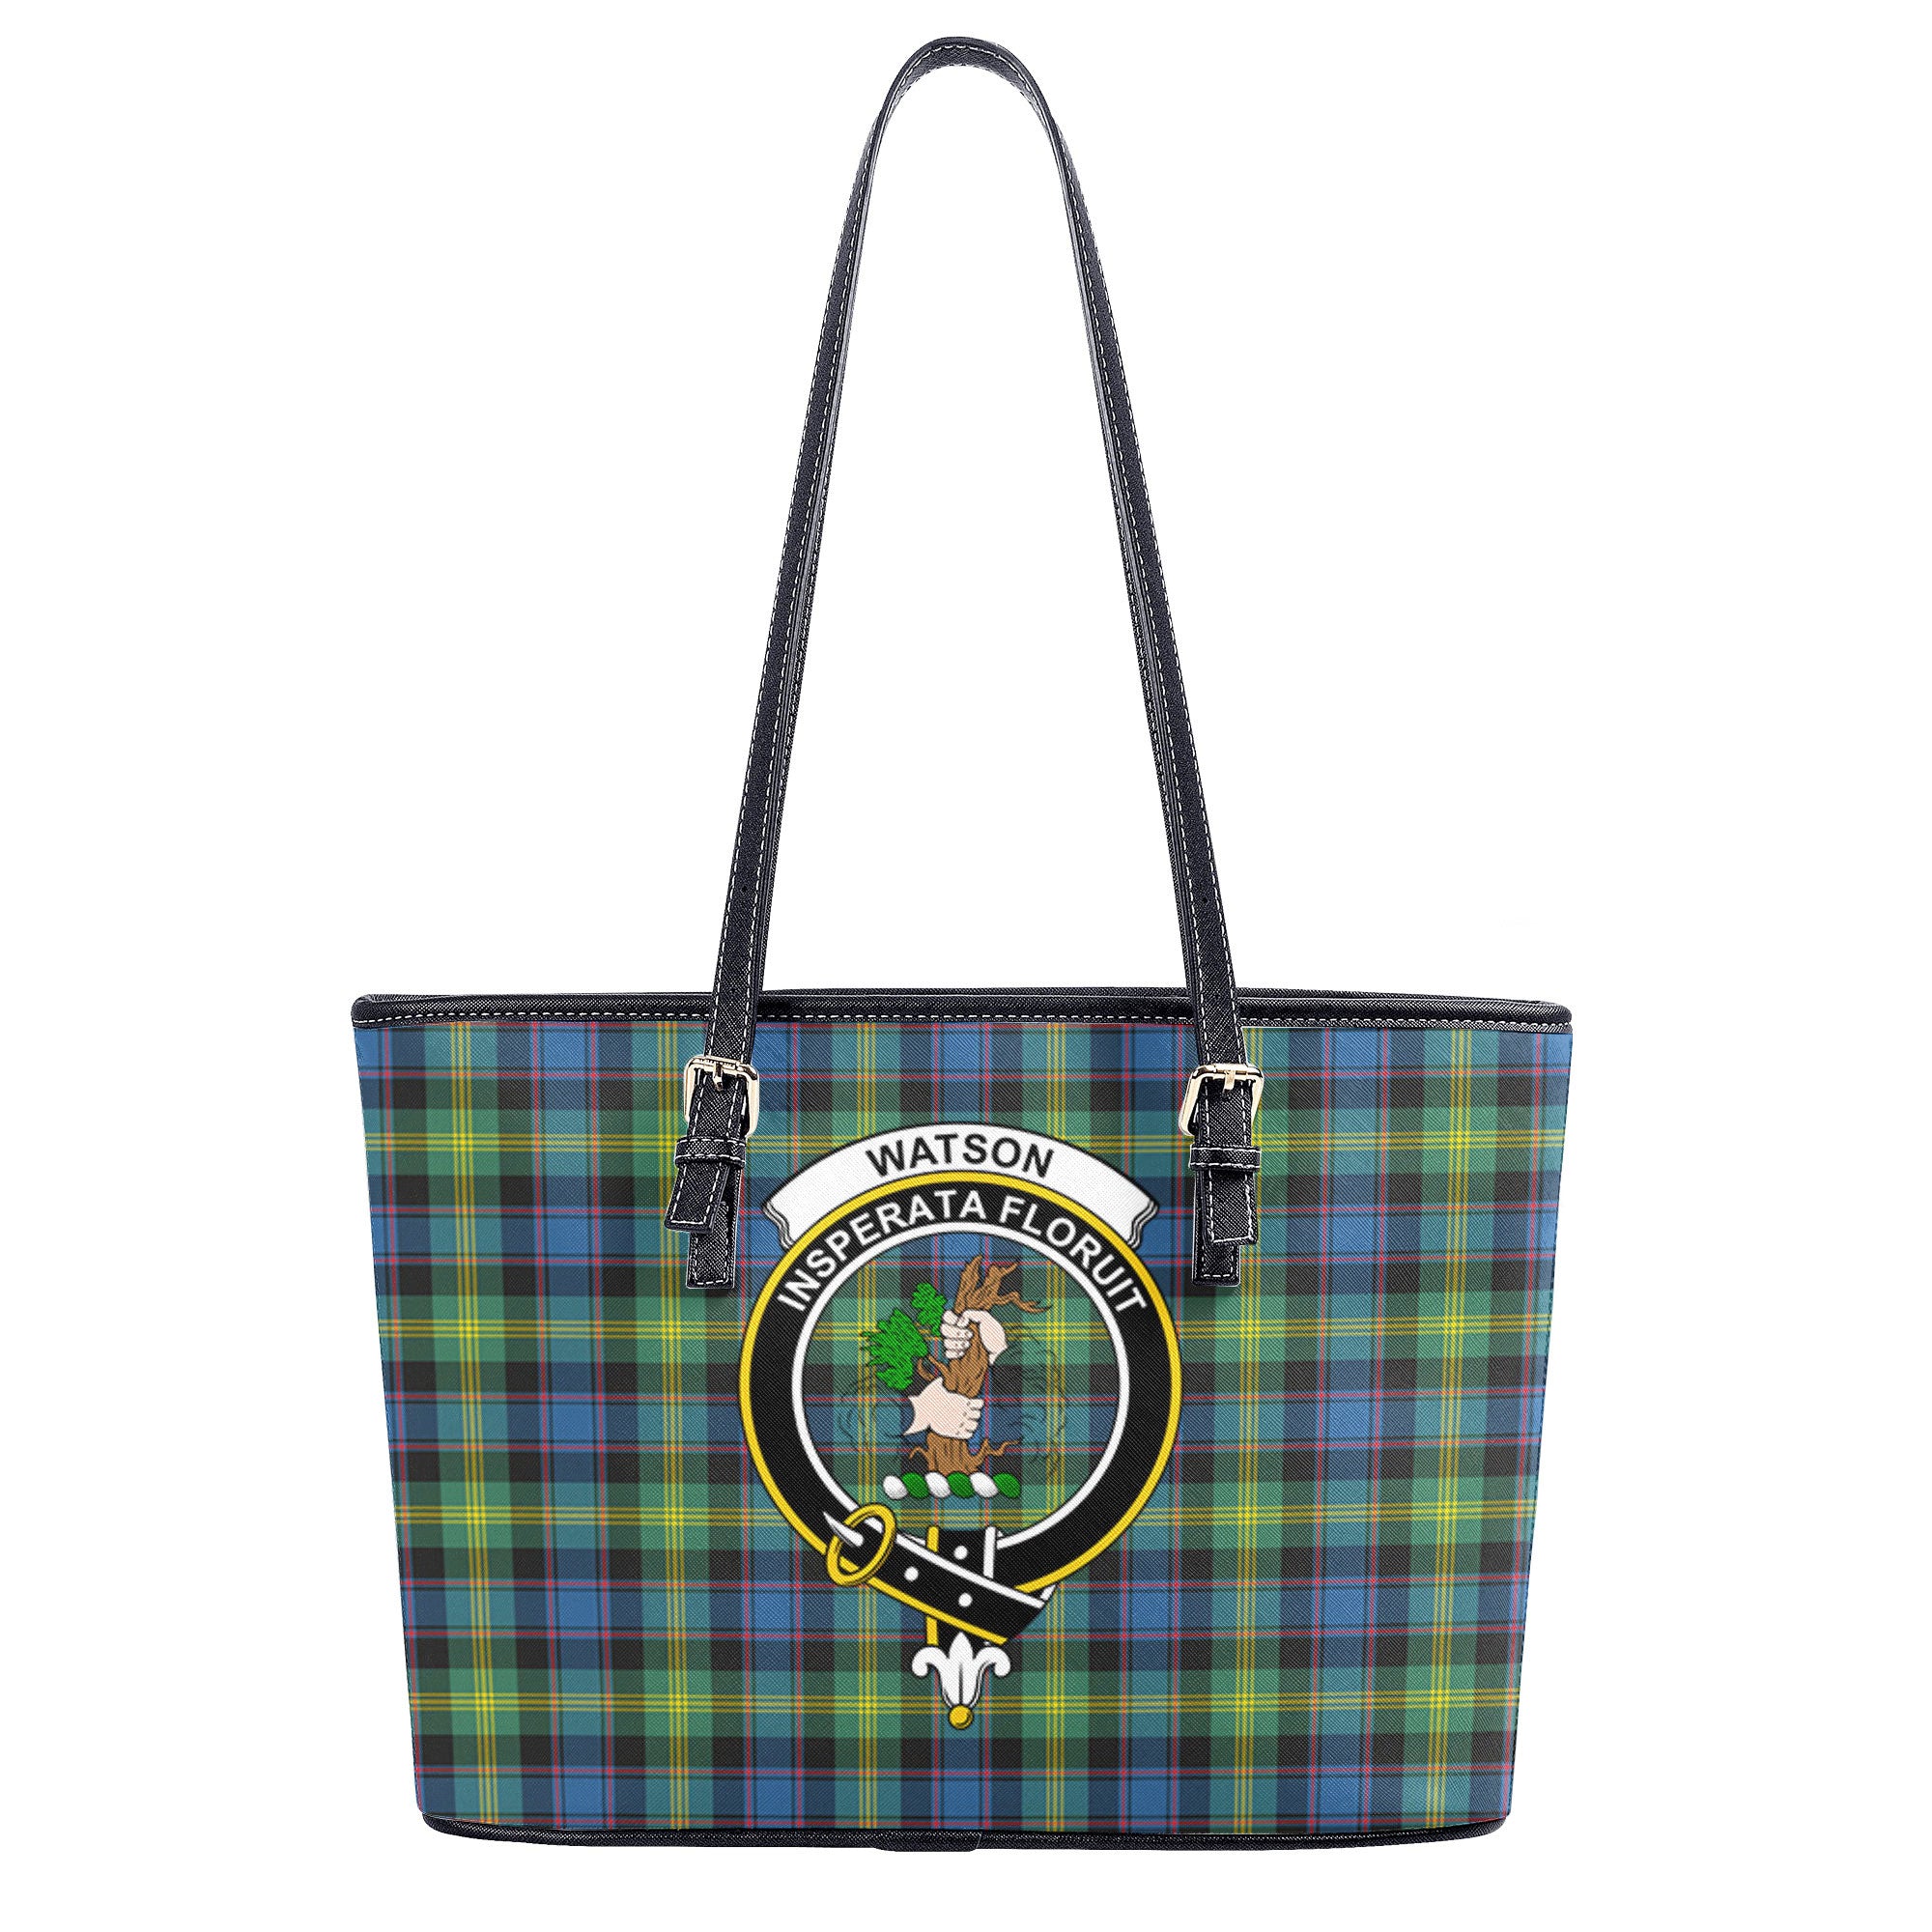 Watson Ancient Tartan Crest Leather Tote Bag